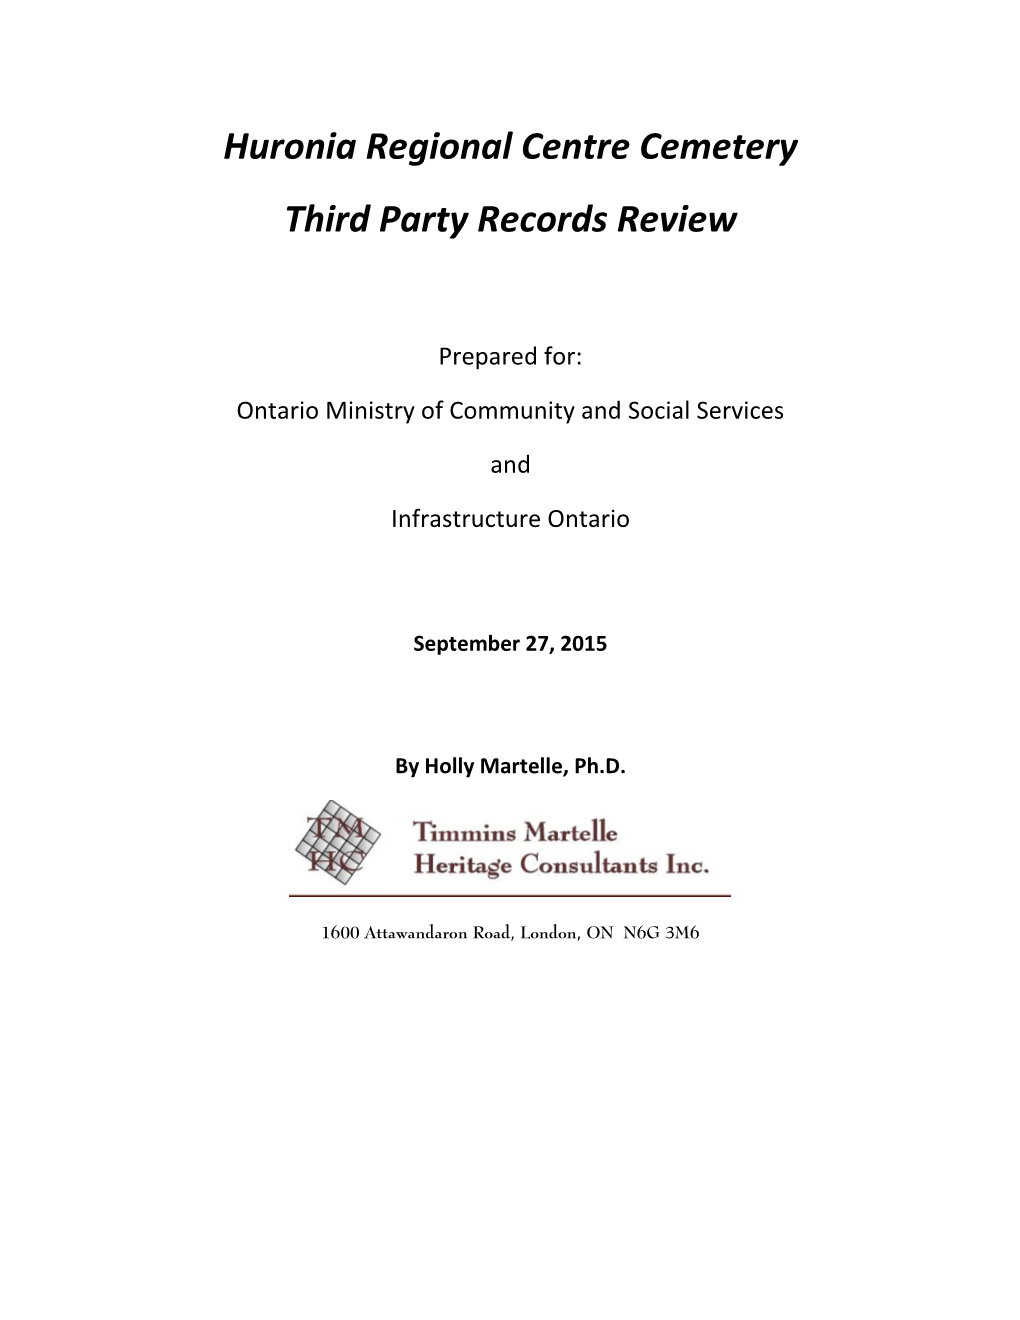 Huronia Regional Centre Cemetery Third Party Records Review